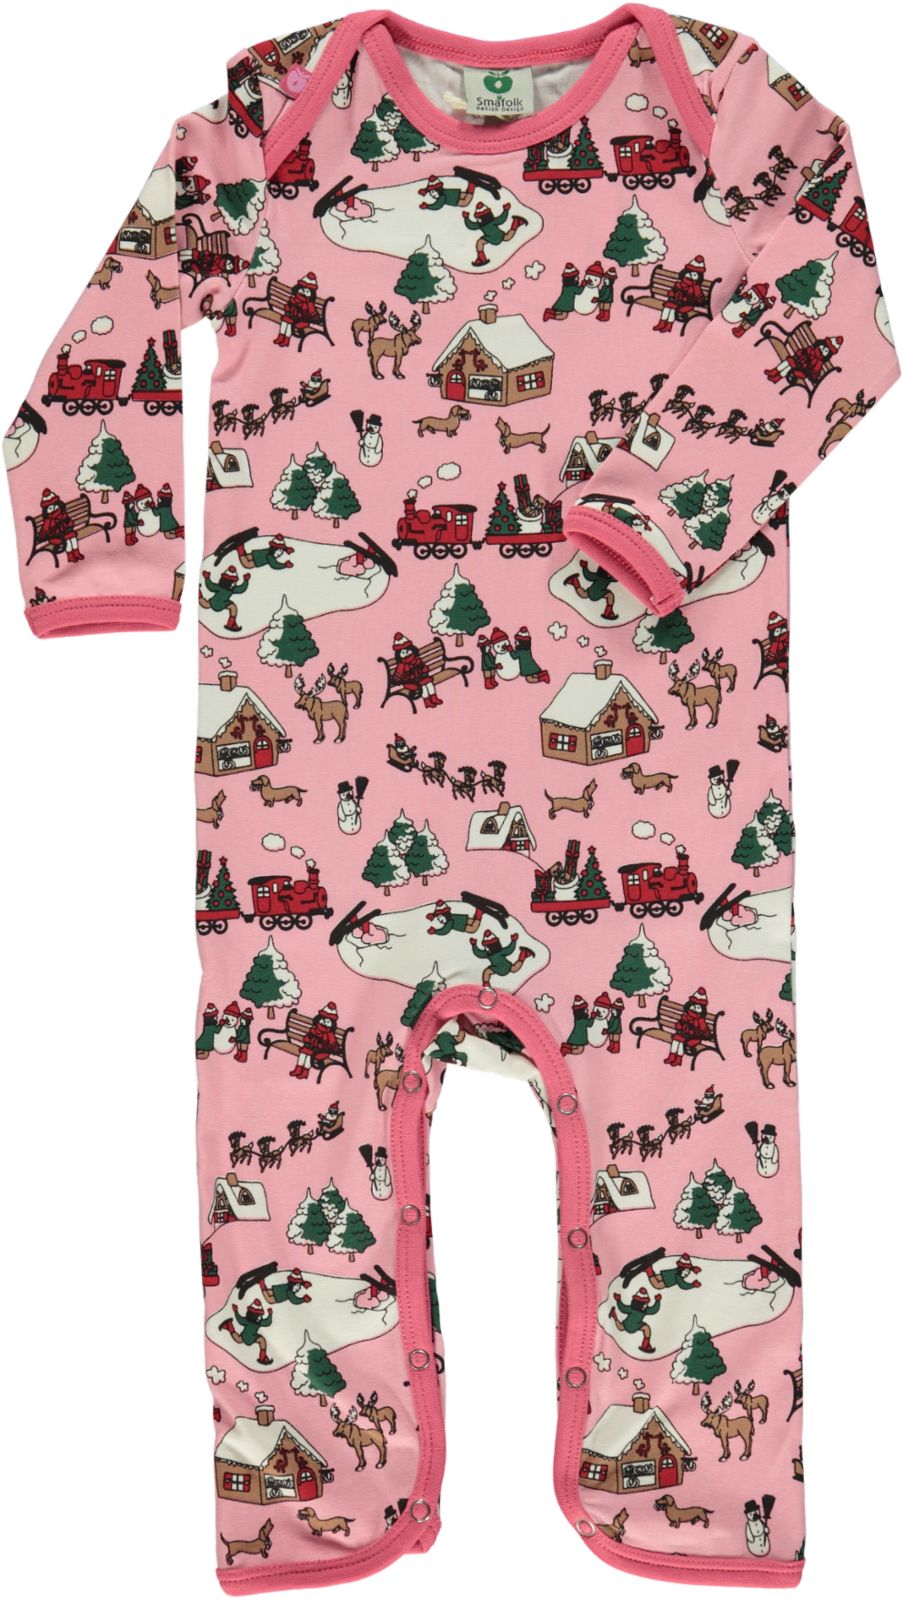 Long-sleeved baby suit with landscape